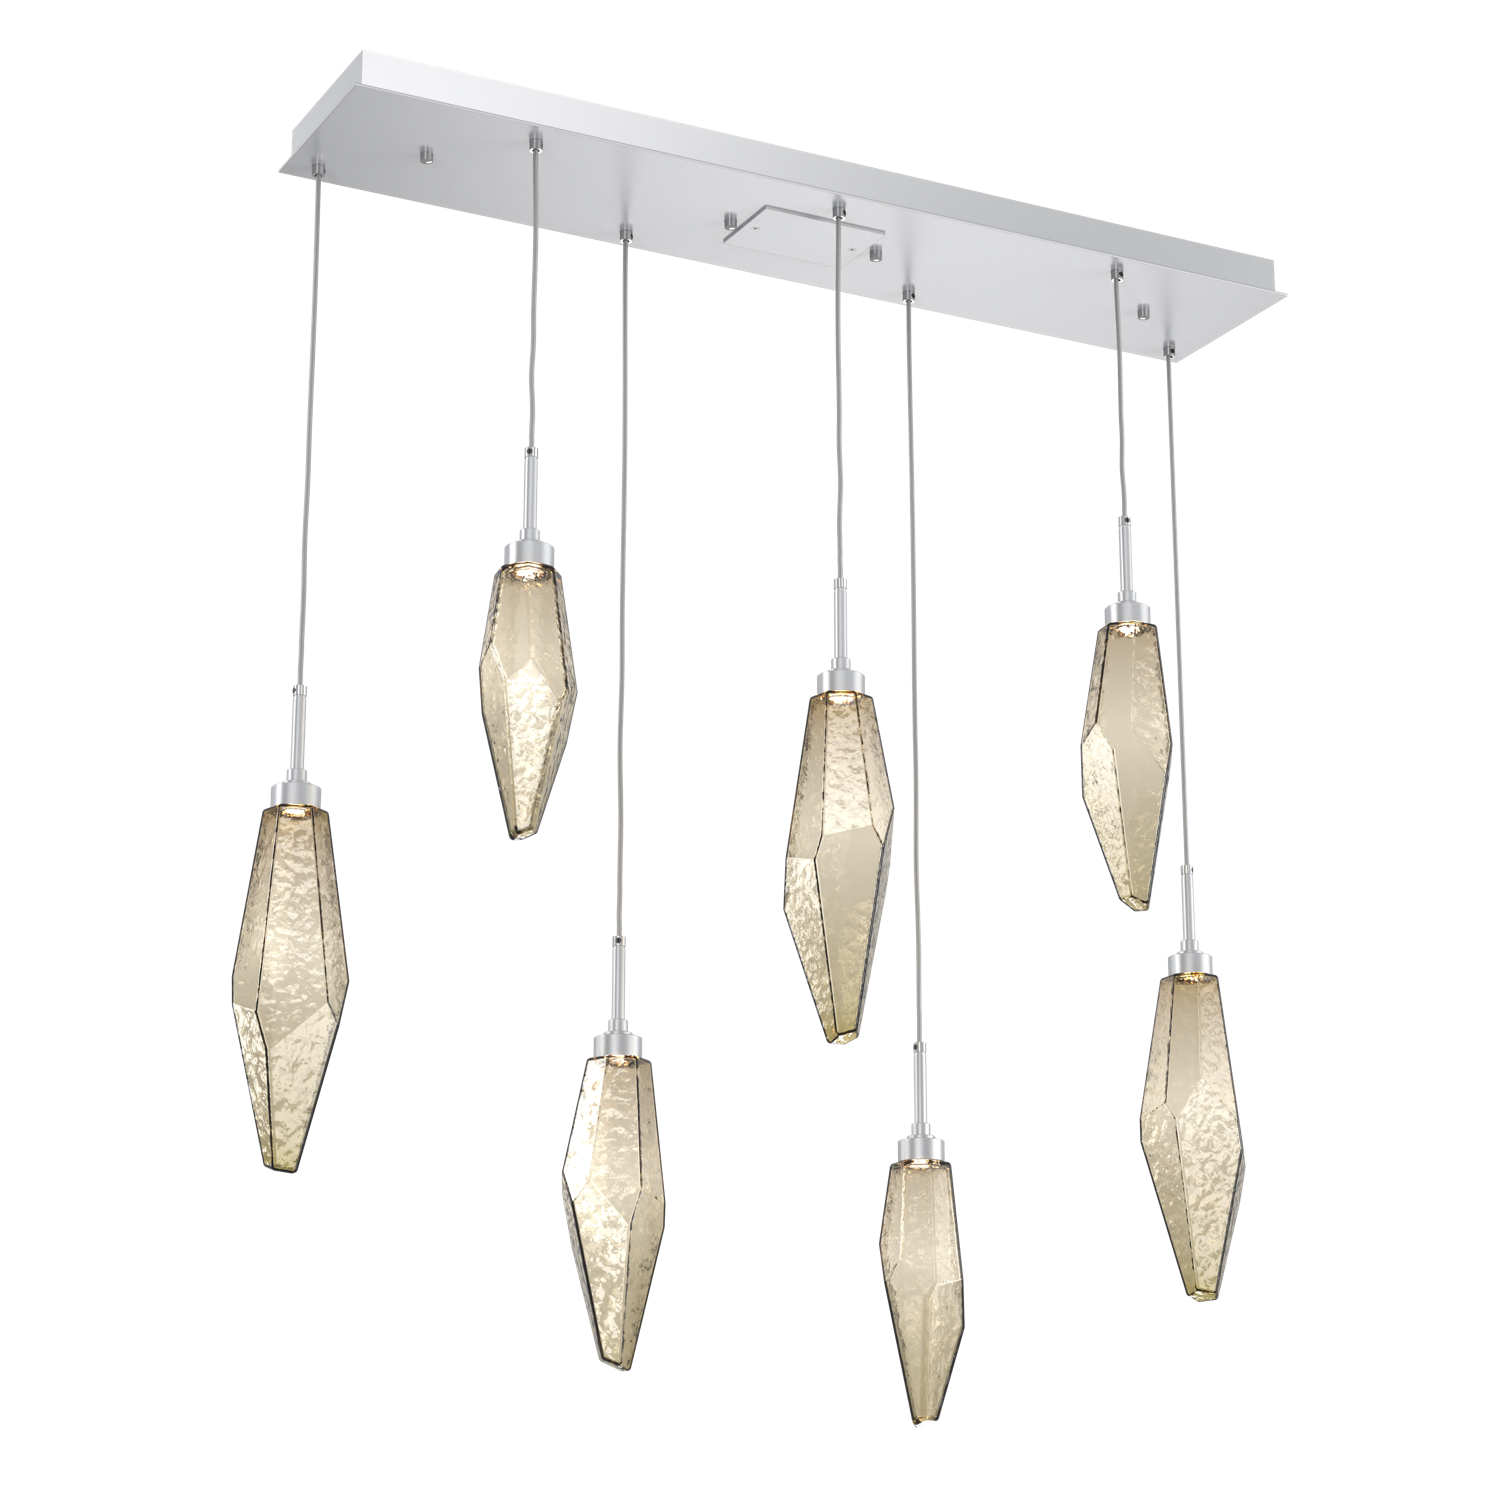 PLB0050-07-CS-CB-Hammerton-Studio-Rock-Crystal-7-light-linear-pendant-chandelier-with-classic-silver-finish-and-chilled-bronze-blown-glass-shades-and-LED-lamping